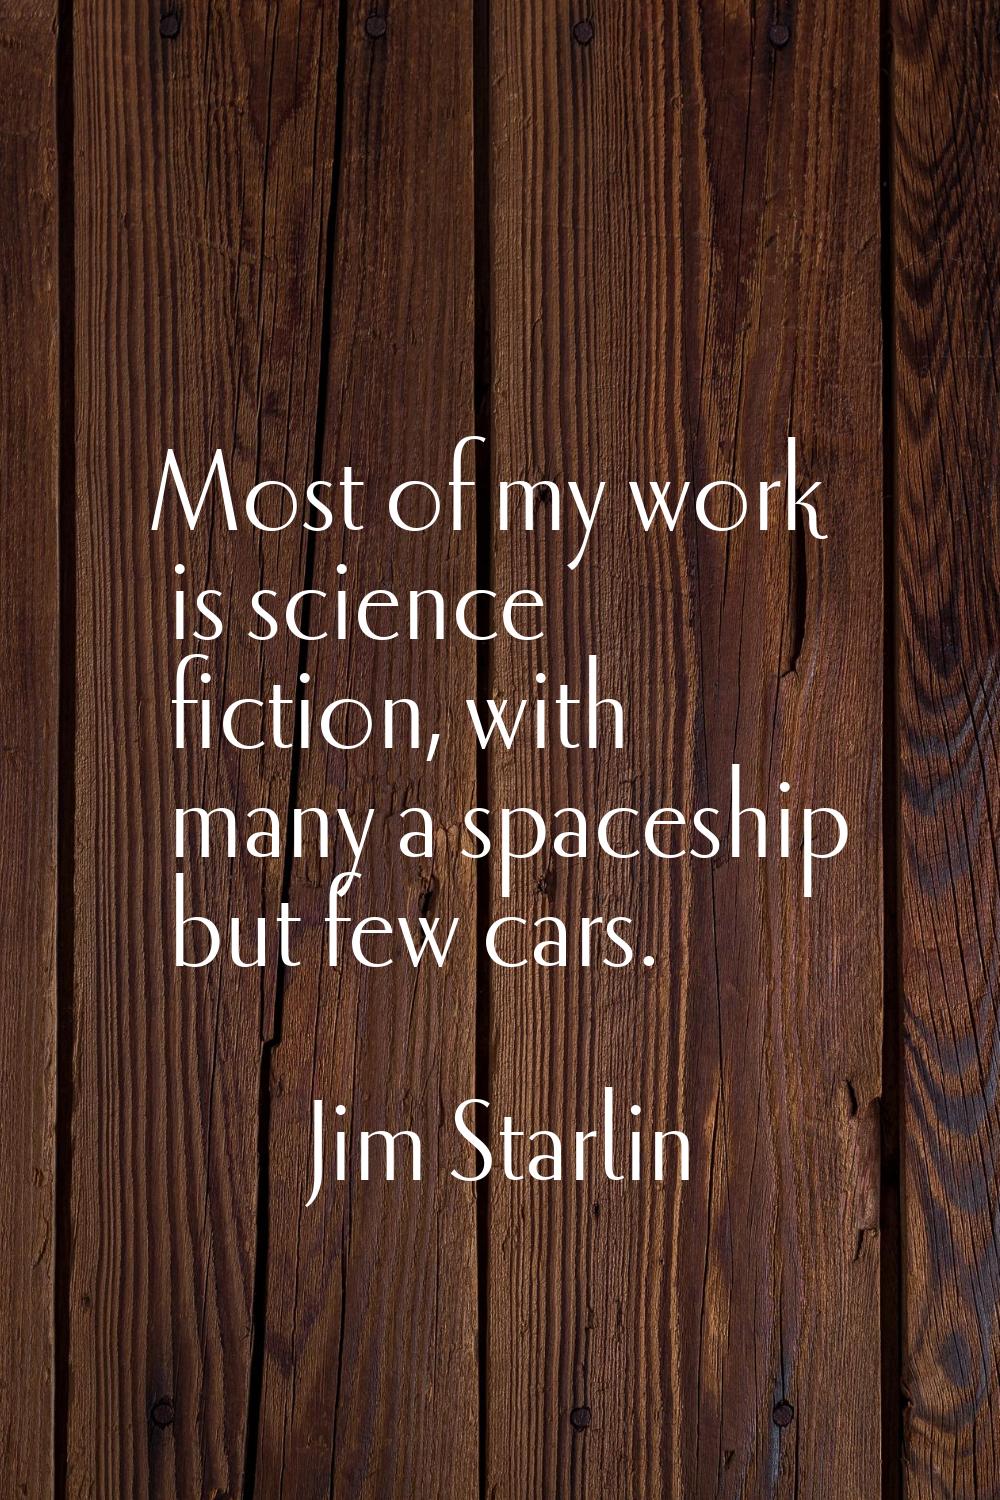 Most of my work is science fiction, with many a spaceship but few cars.